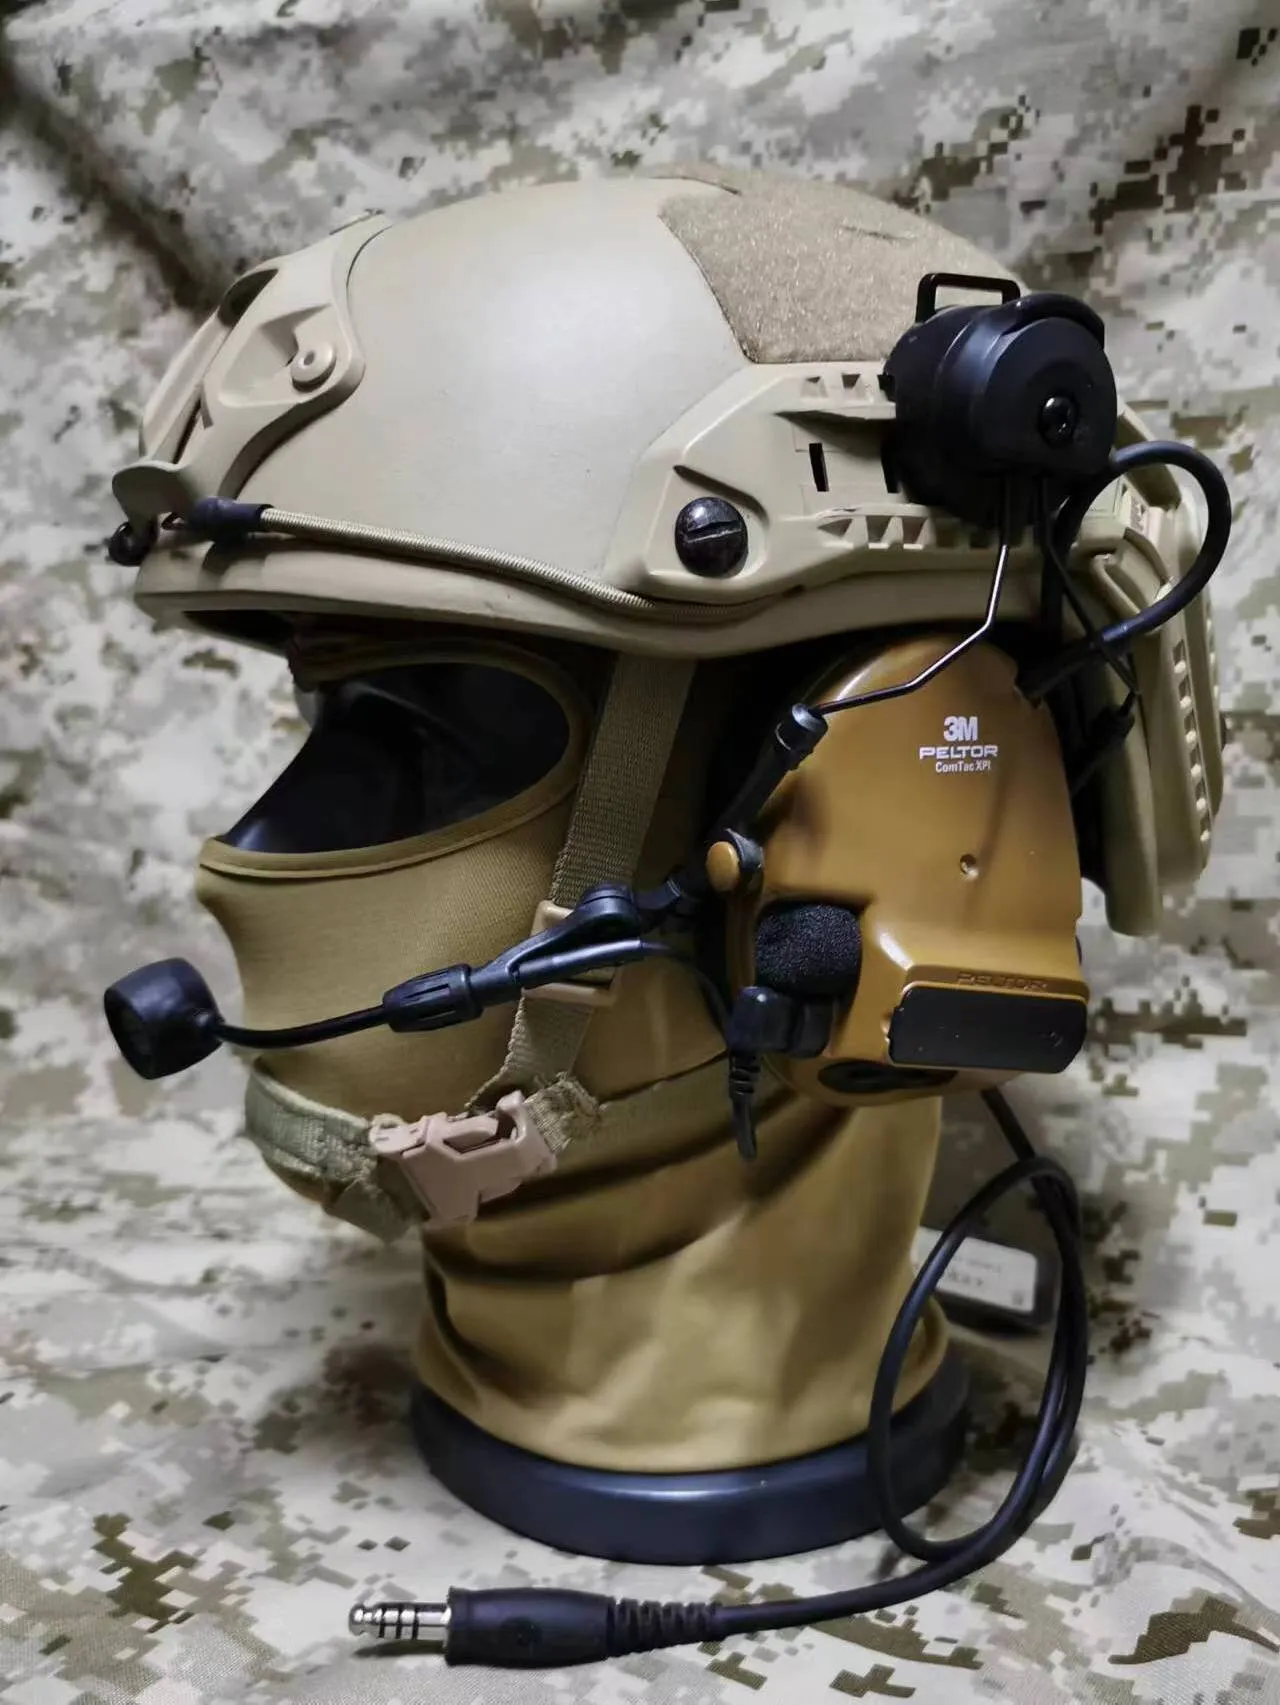 Reproduction of Comtac XPI VI Helmet Edition Pickup and Noise Reduction Earphones to be prepared with 3M/XPI VI side labels